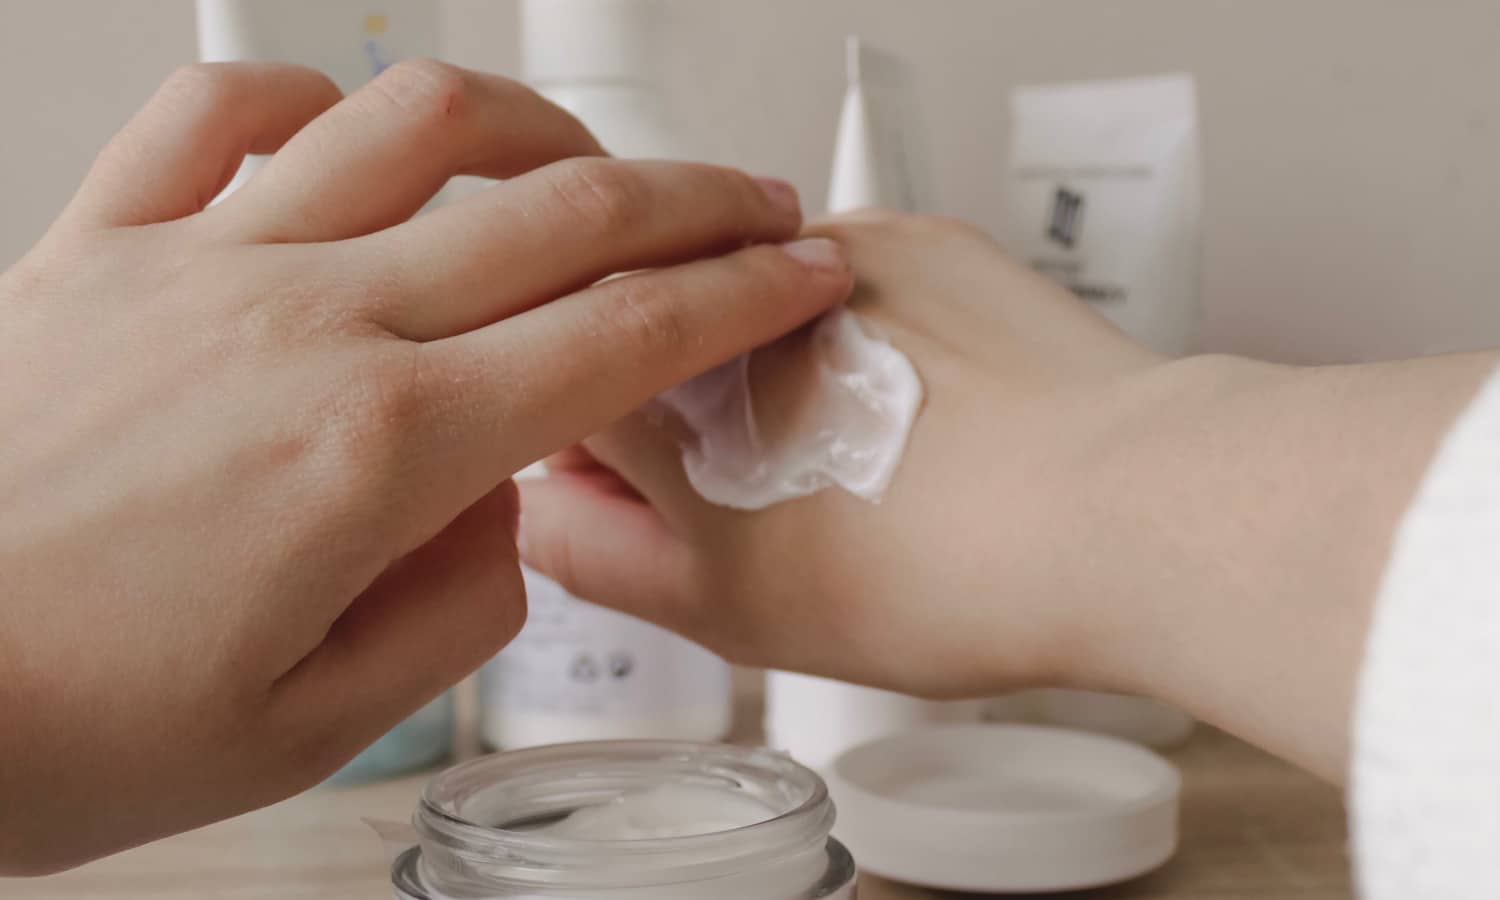 Chapped Hands? Here Are 4 Remedies To Help